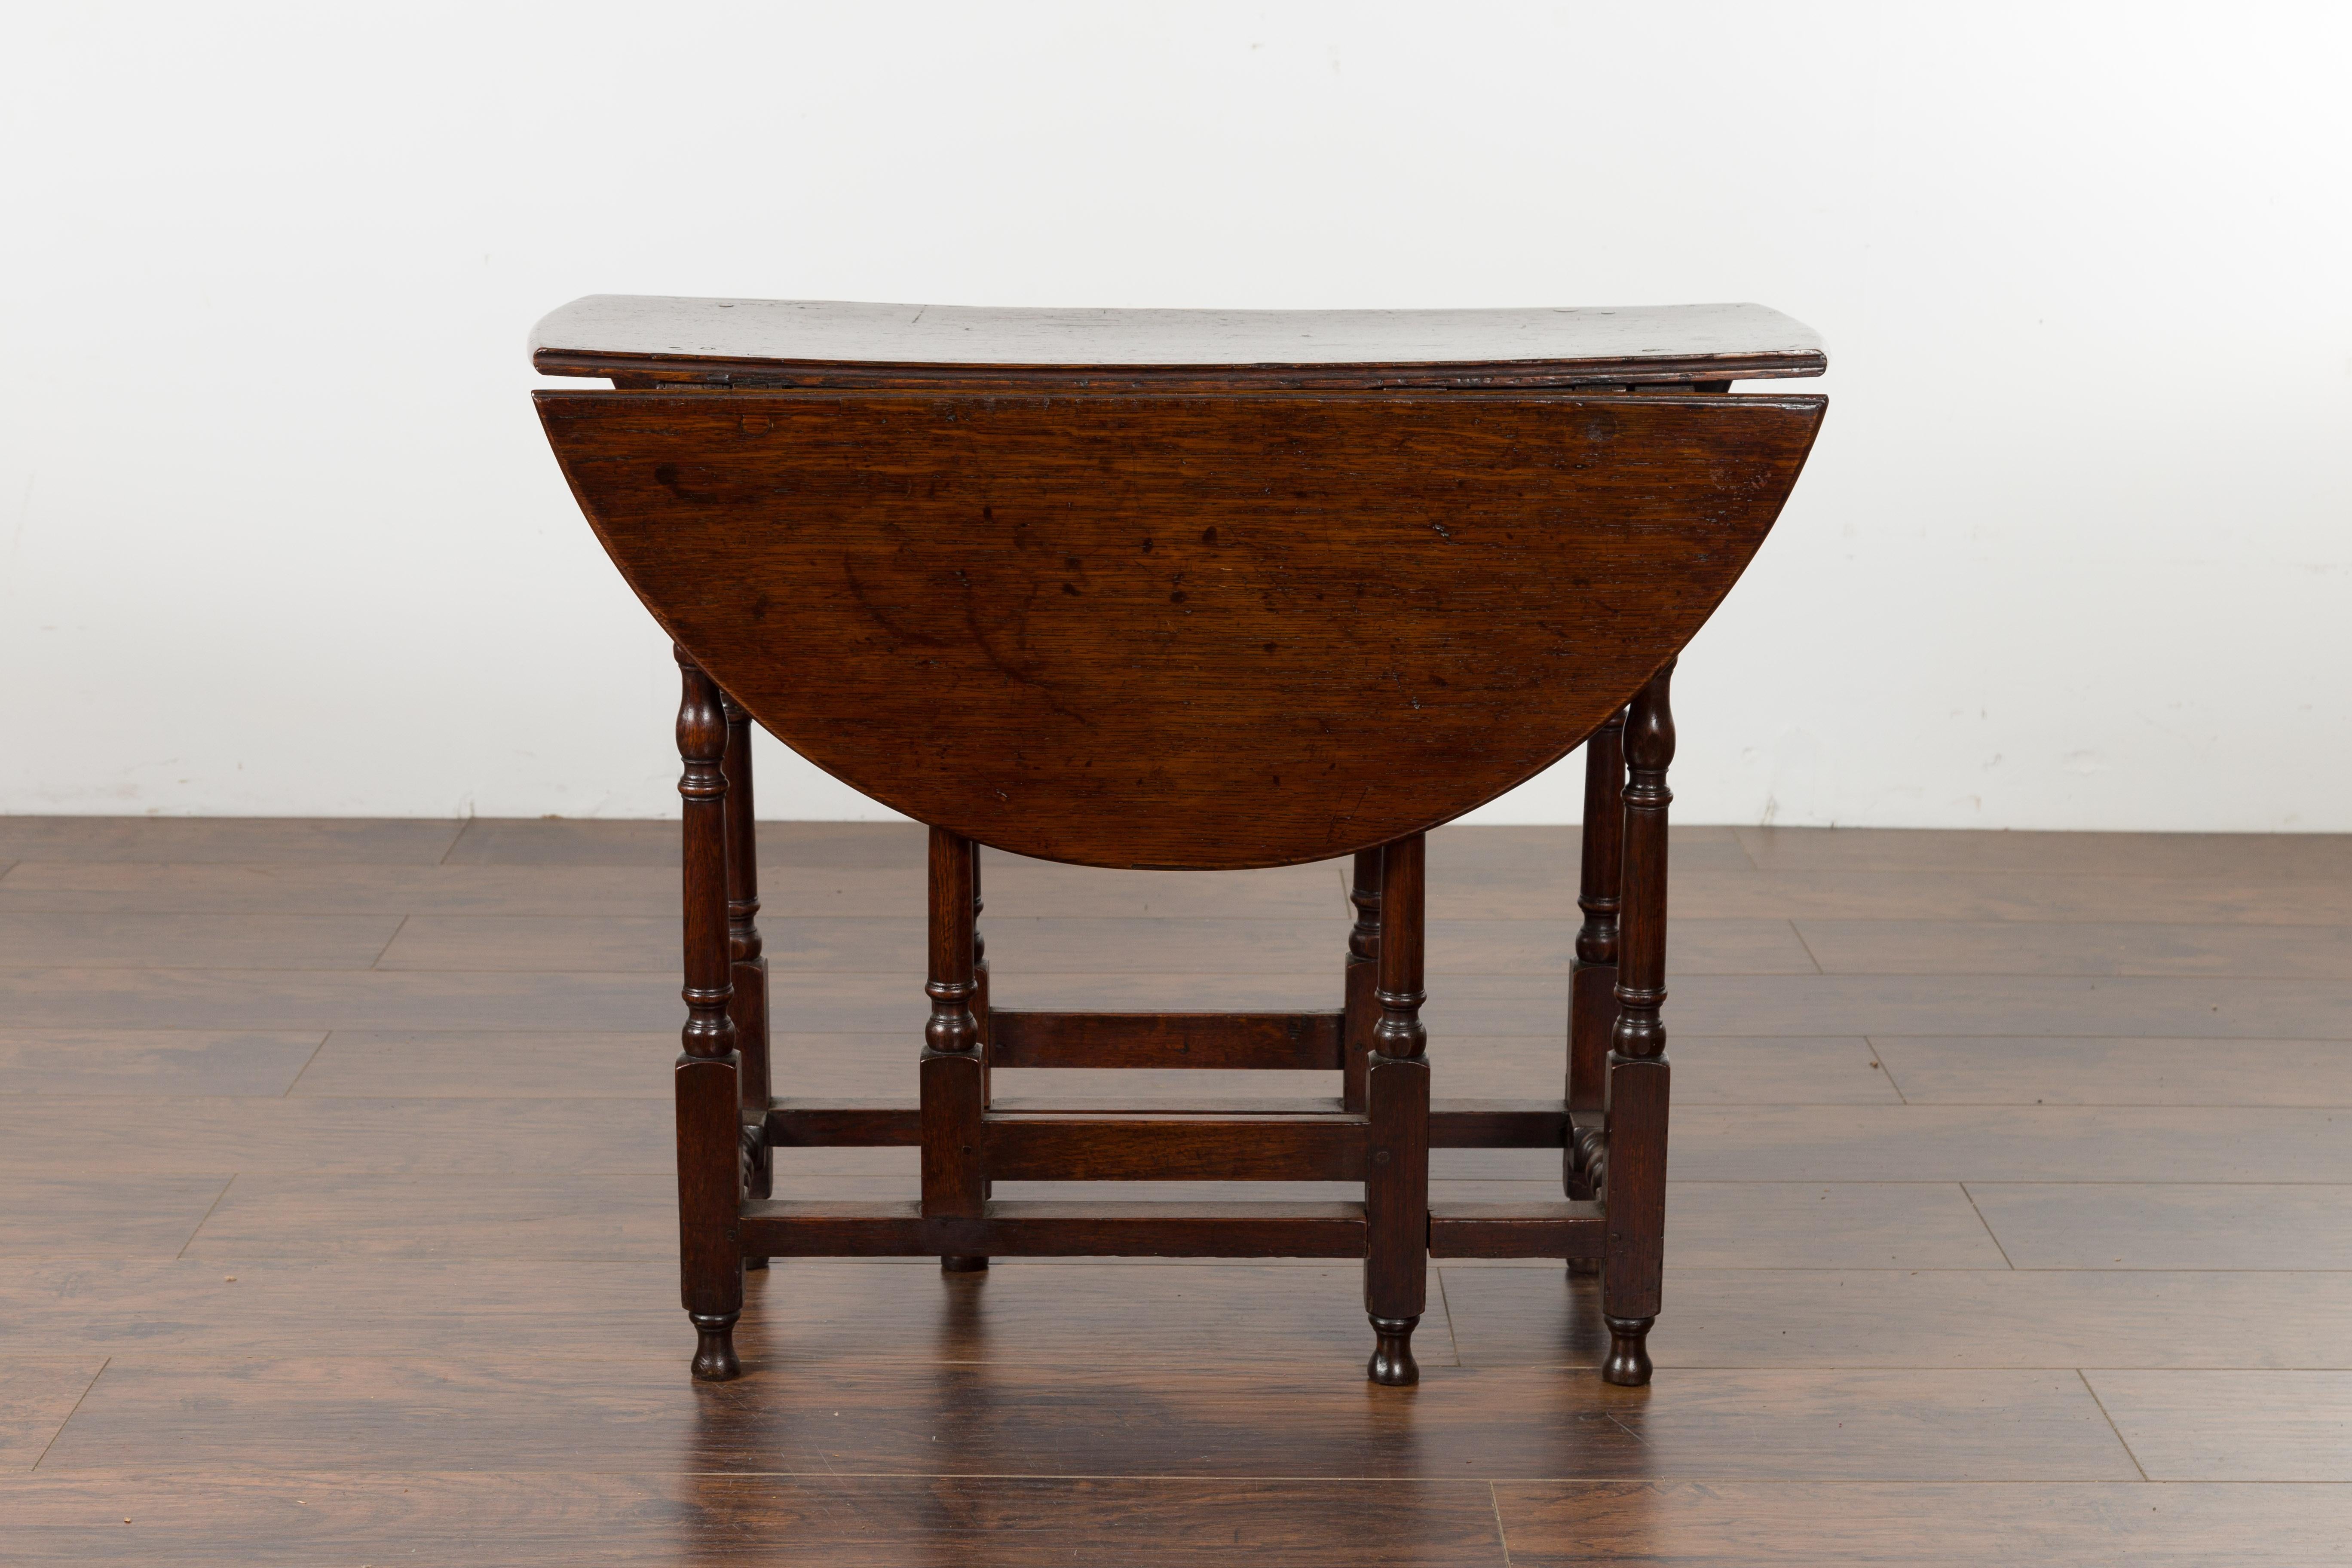 A petite English oak oval drop-leaf table from the late 19th century, with baluster legs. Created in England during the 19th century, this oak table features an oval top made of two drop leaves resting on swivel supports. The top is 10.5